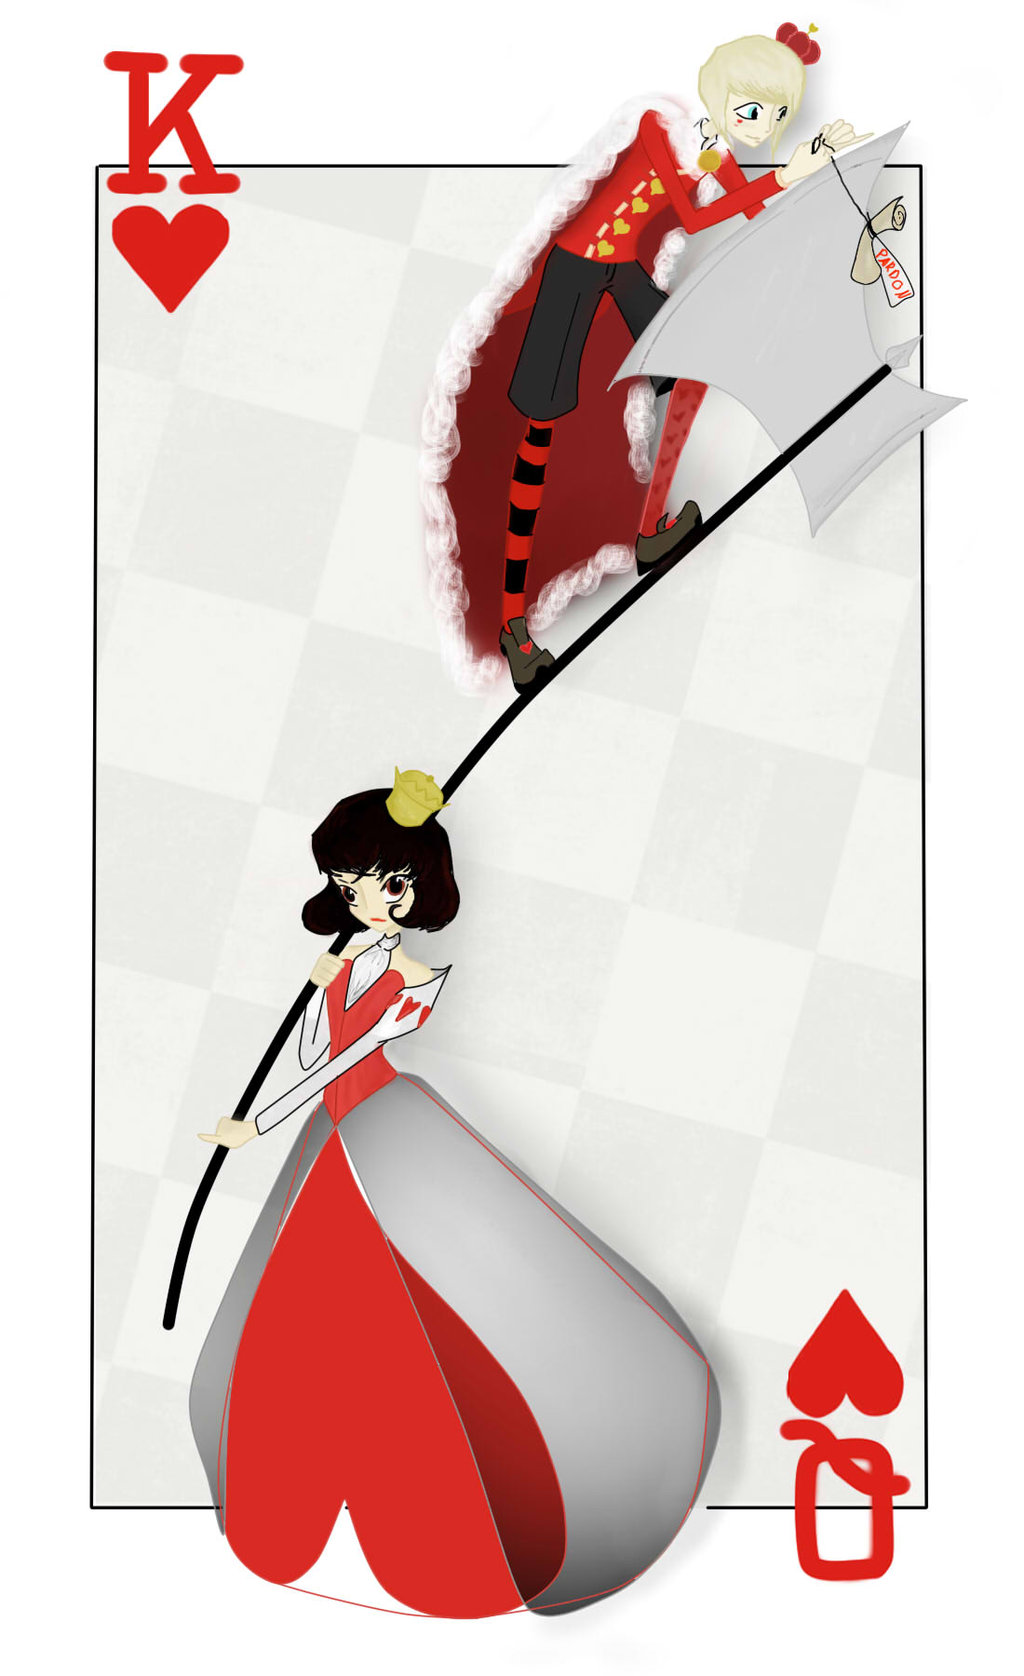 Queen and King of Hearts by luckyjadestone